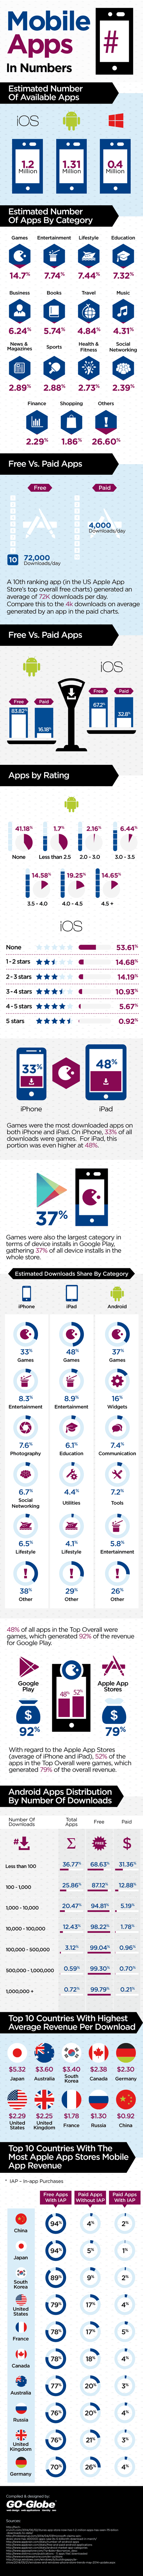 Mobile apps in numbers - Statistics and Trends